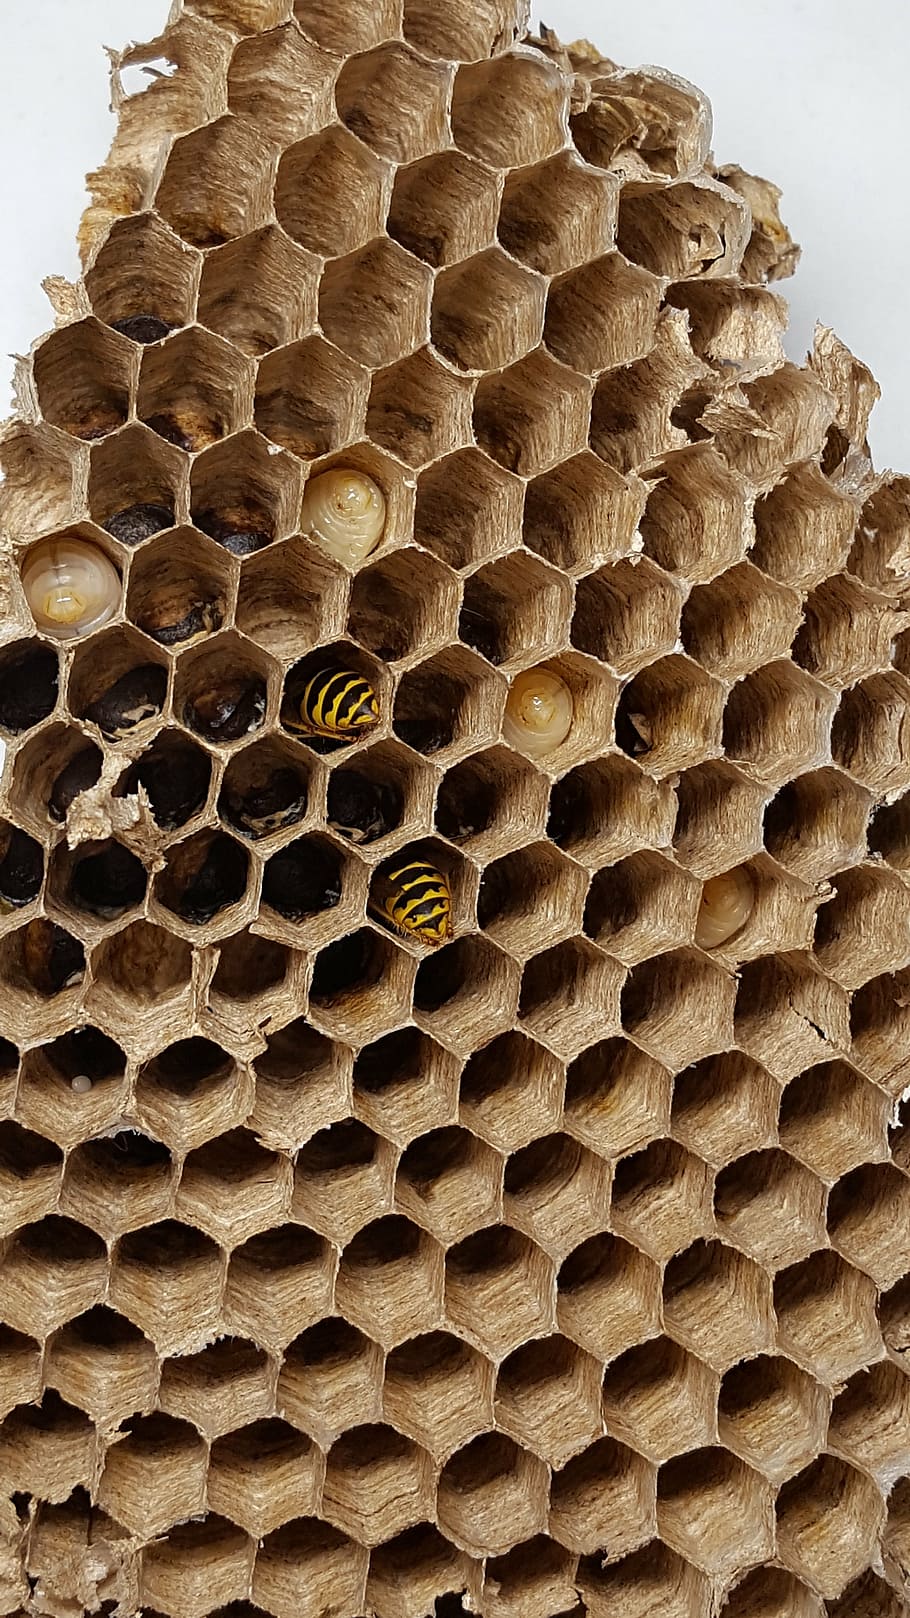 combs, bee, wasp, insect, honeycomb structure, wasps dwelling